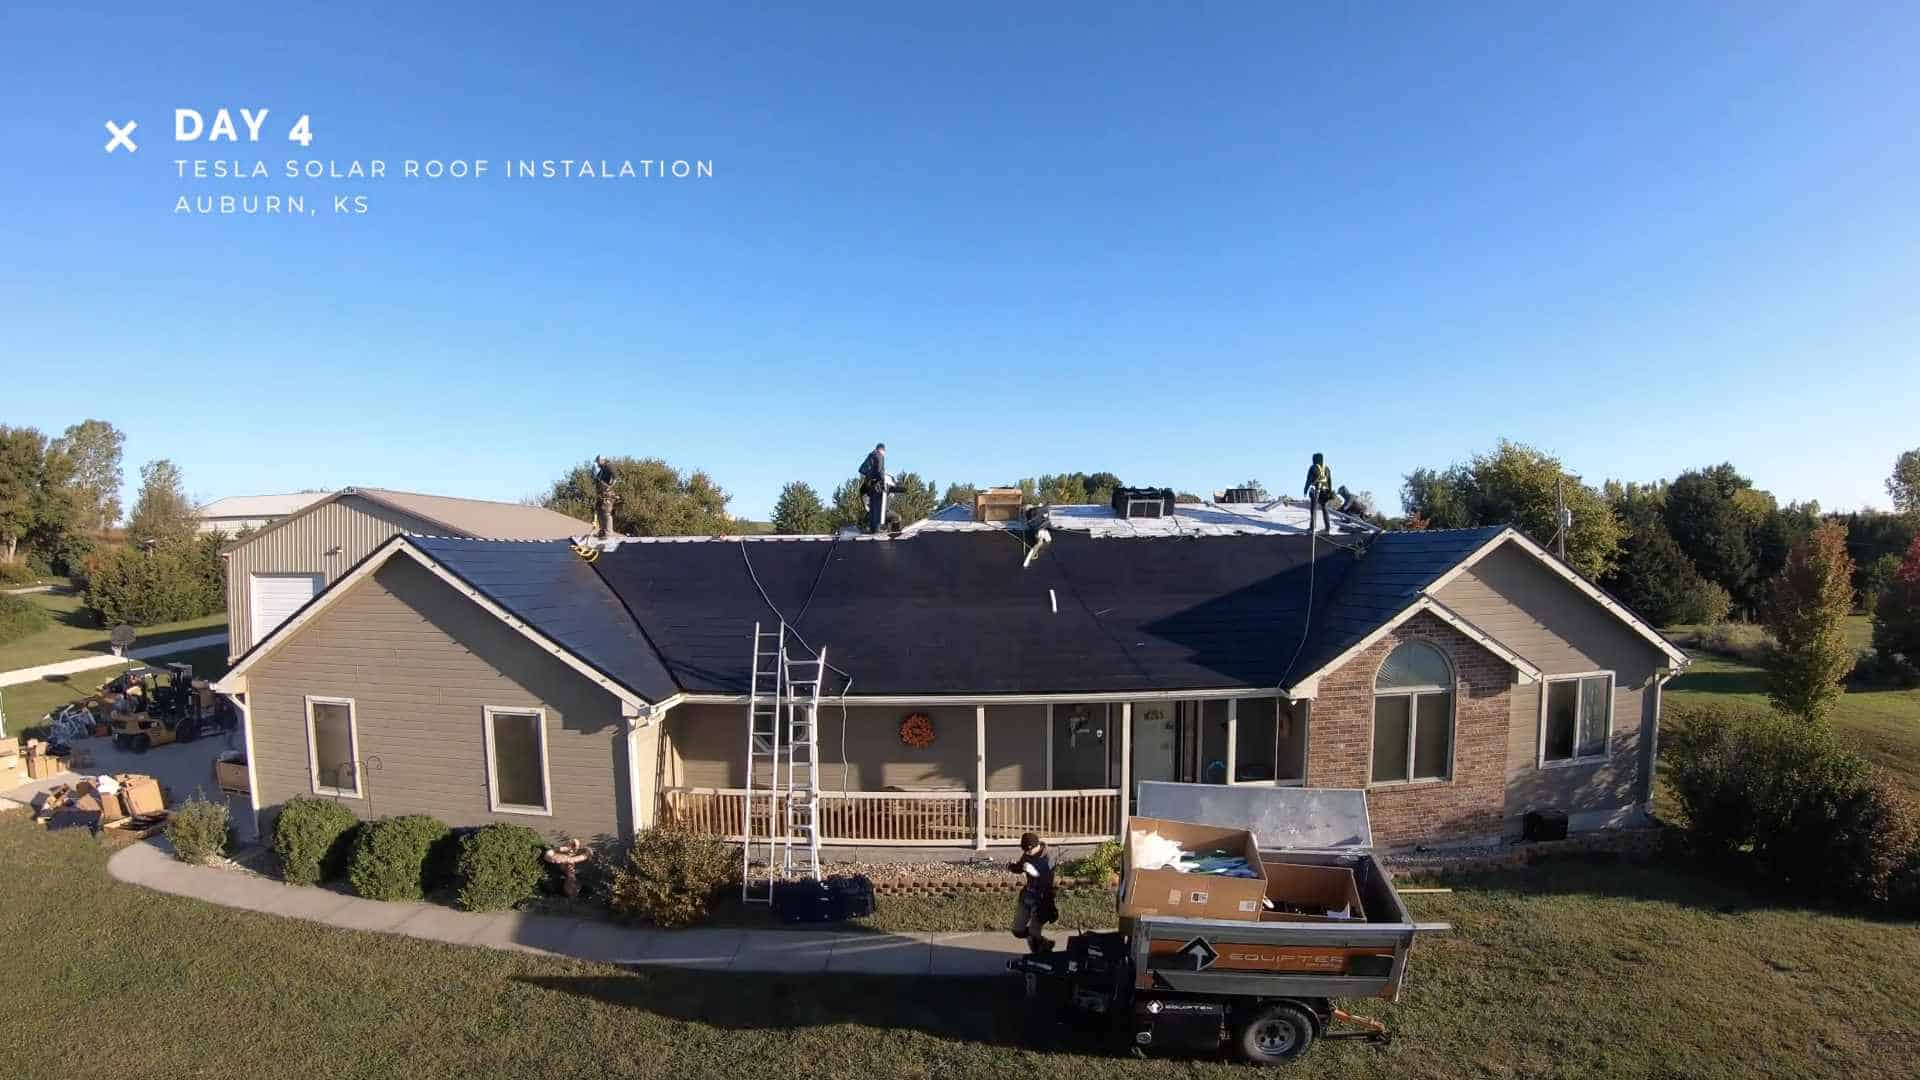 Weddle & Sons Solar Roof Install Day 4